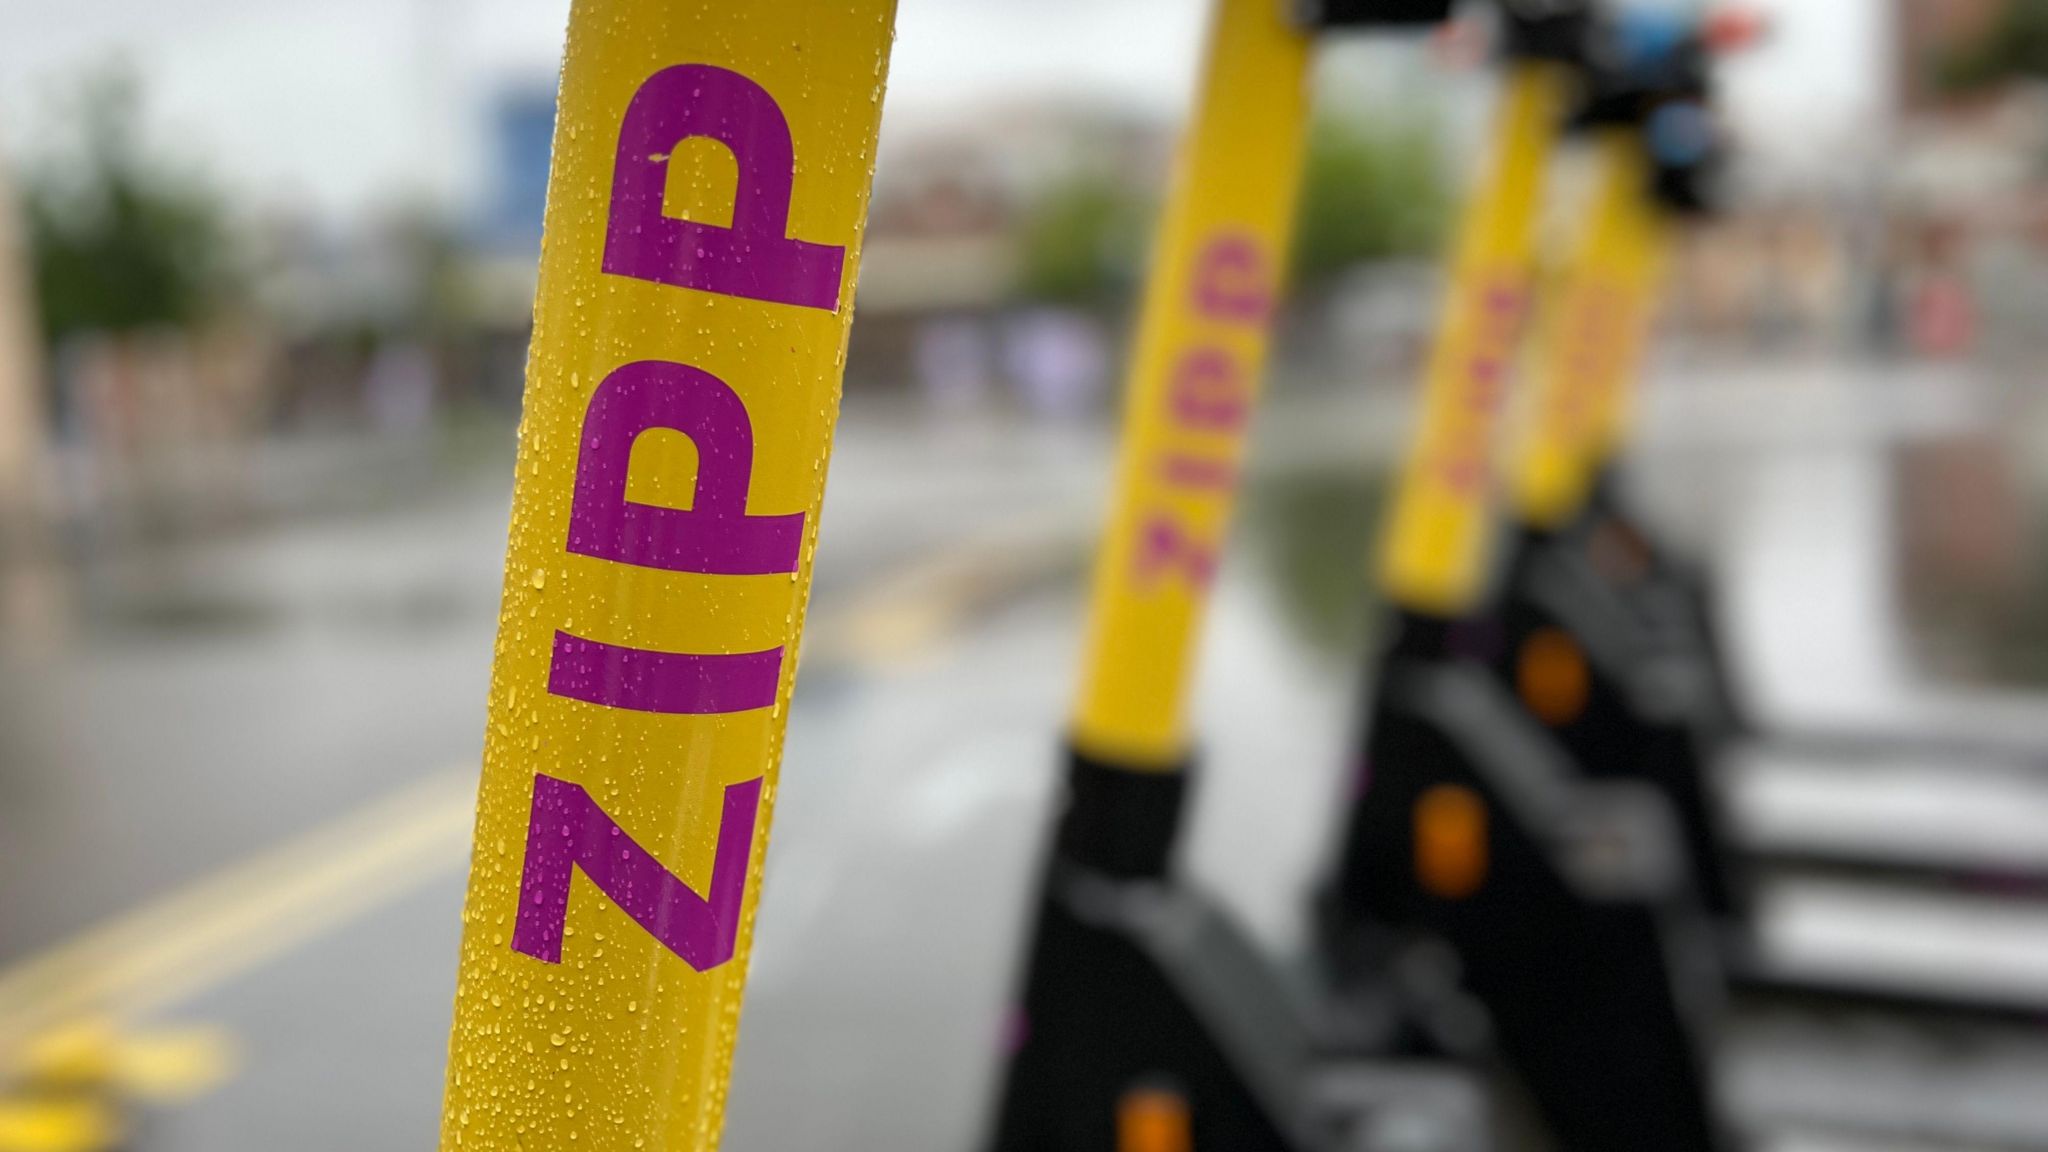 A Zipp logo in pink on the yellow body, with other e-scooters in the background